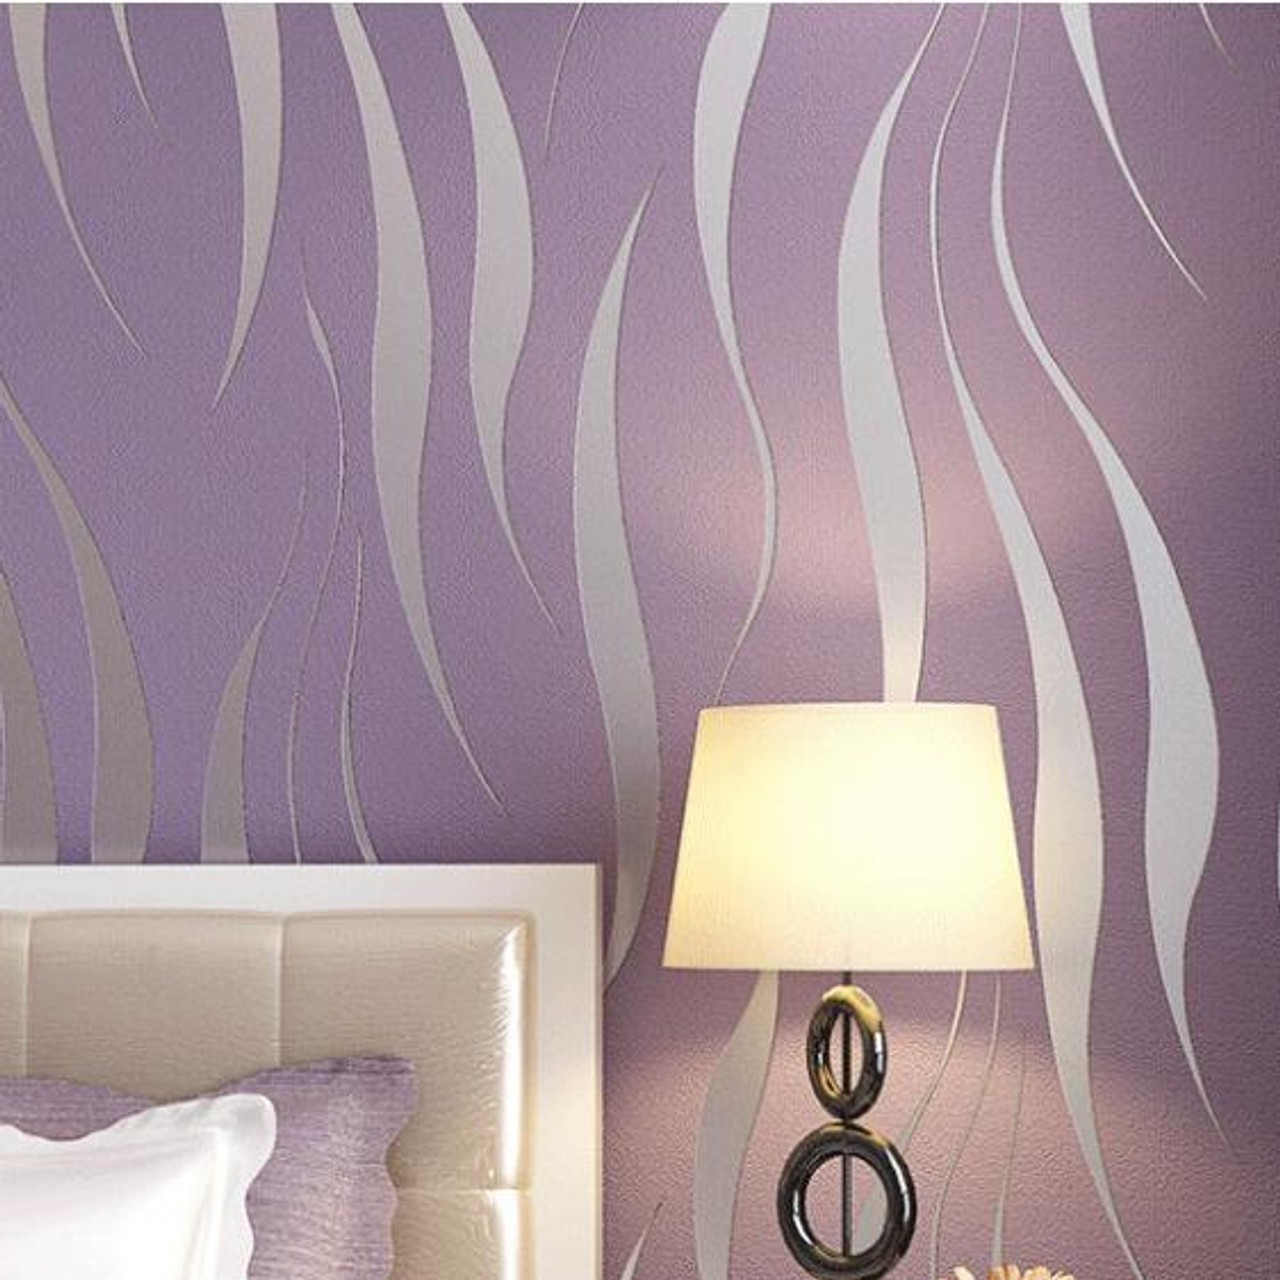 Eurotex Damask Design Wallpaper Roll for Covering Living Room Bedroom  Walls PVC Coated Size 53x1000cm 57sqft Beige Color 37204  Amazonin  Home Improvement